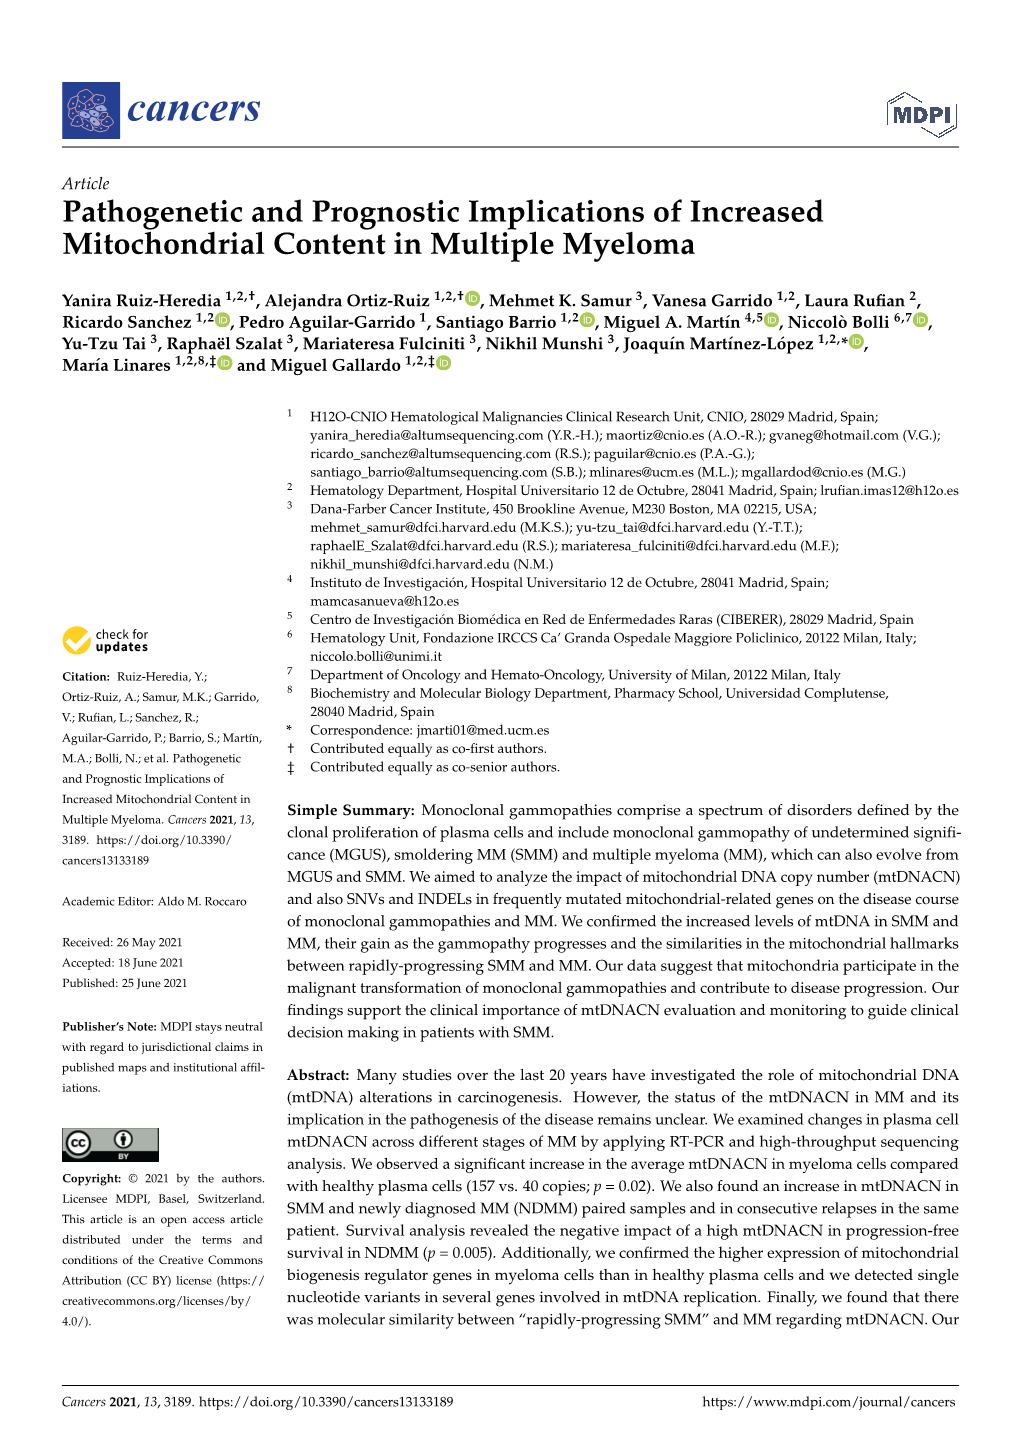 Pathogenetic and Prognostic Implications of Increased Mitochondrial Content in Multiple Myeloma